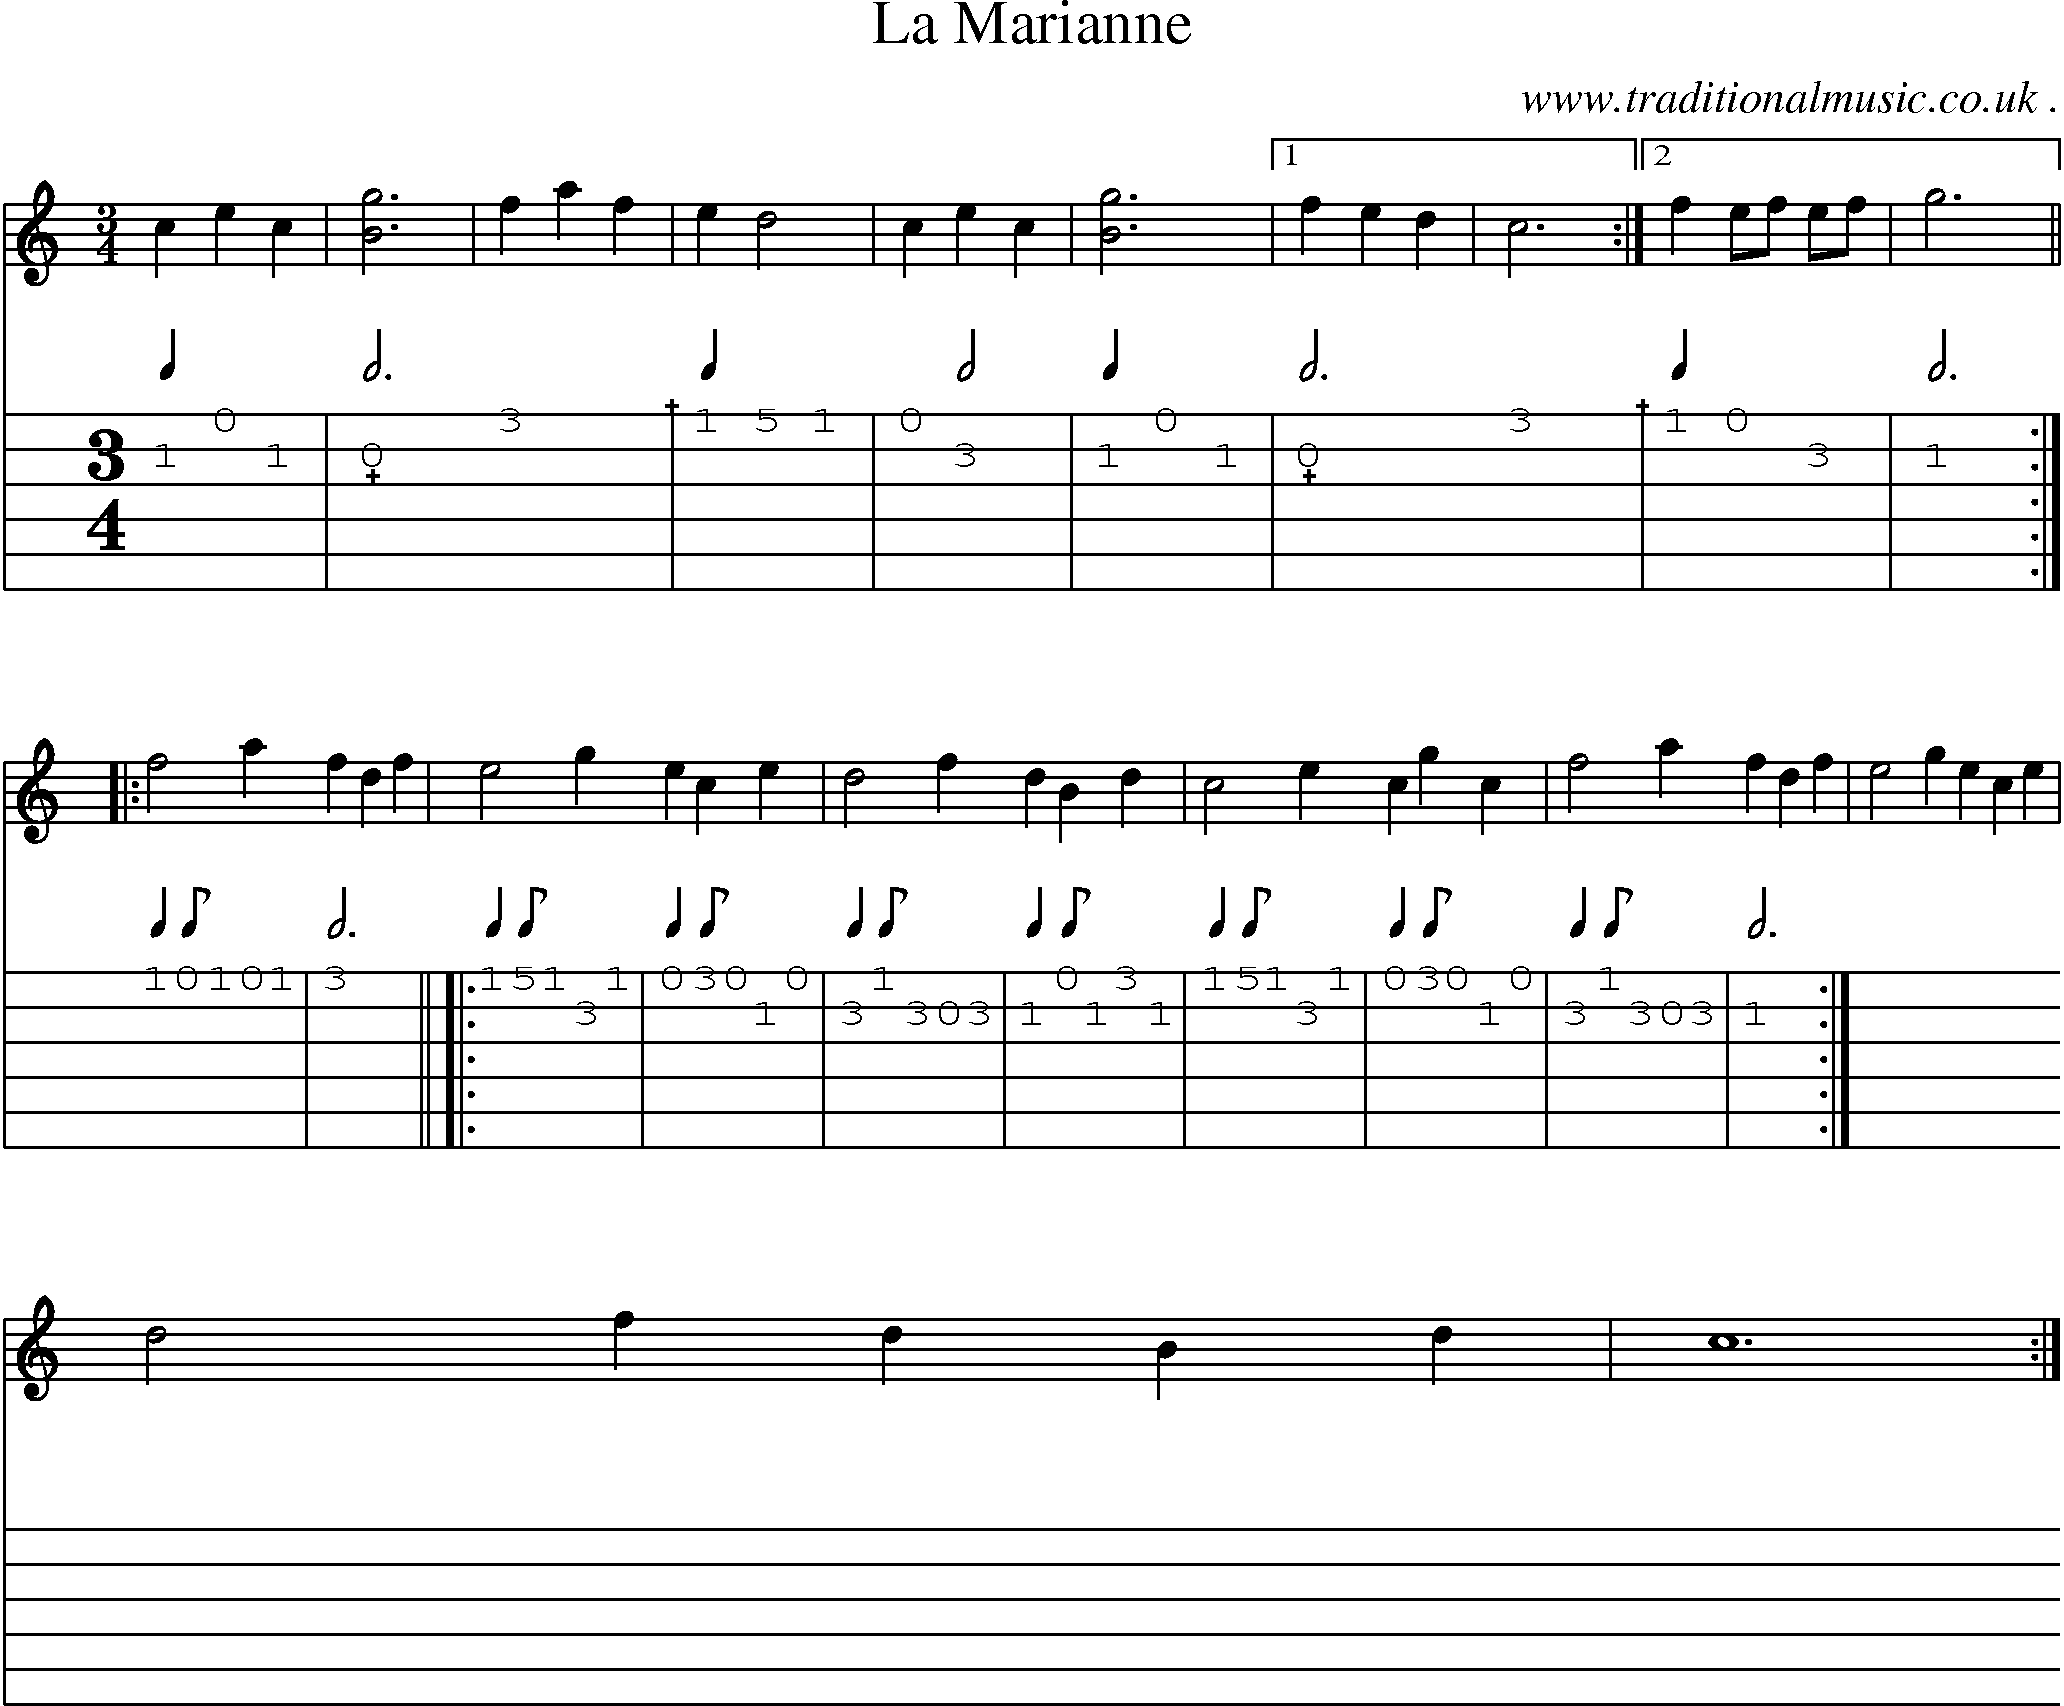 Sheet-Music and Guitar Tabs for La Marianne.